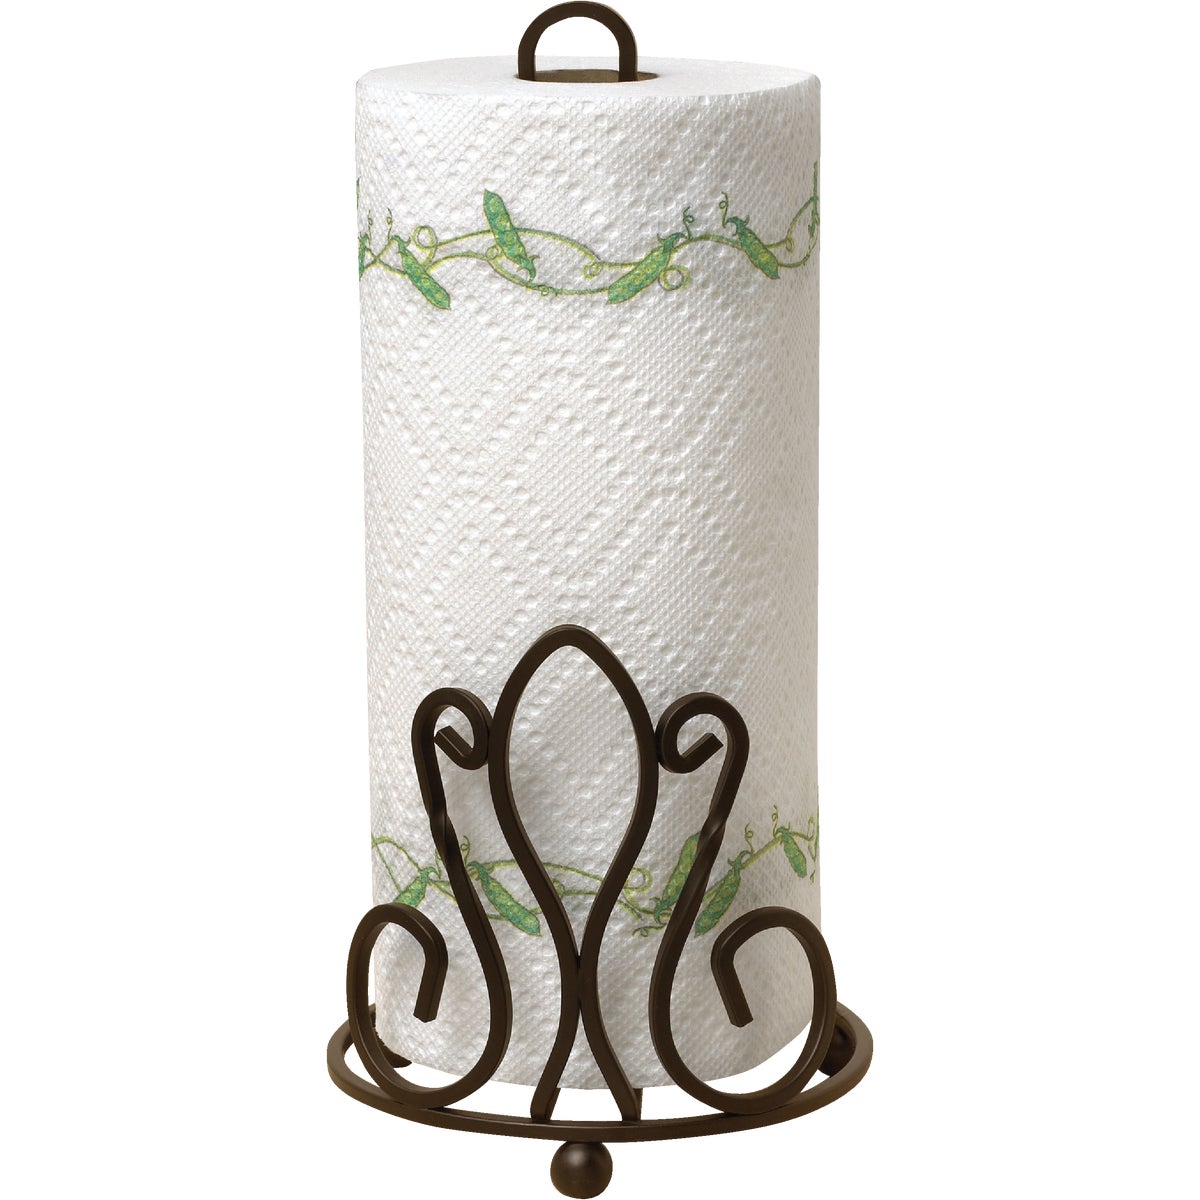 Item 601332, Easy access to paper towels anytime with beautiful scrolls and twist 